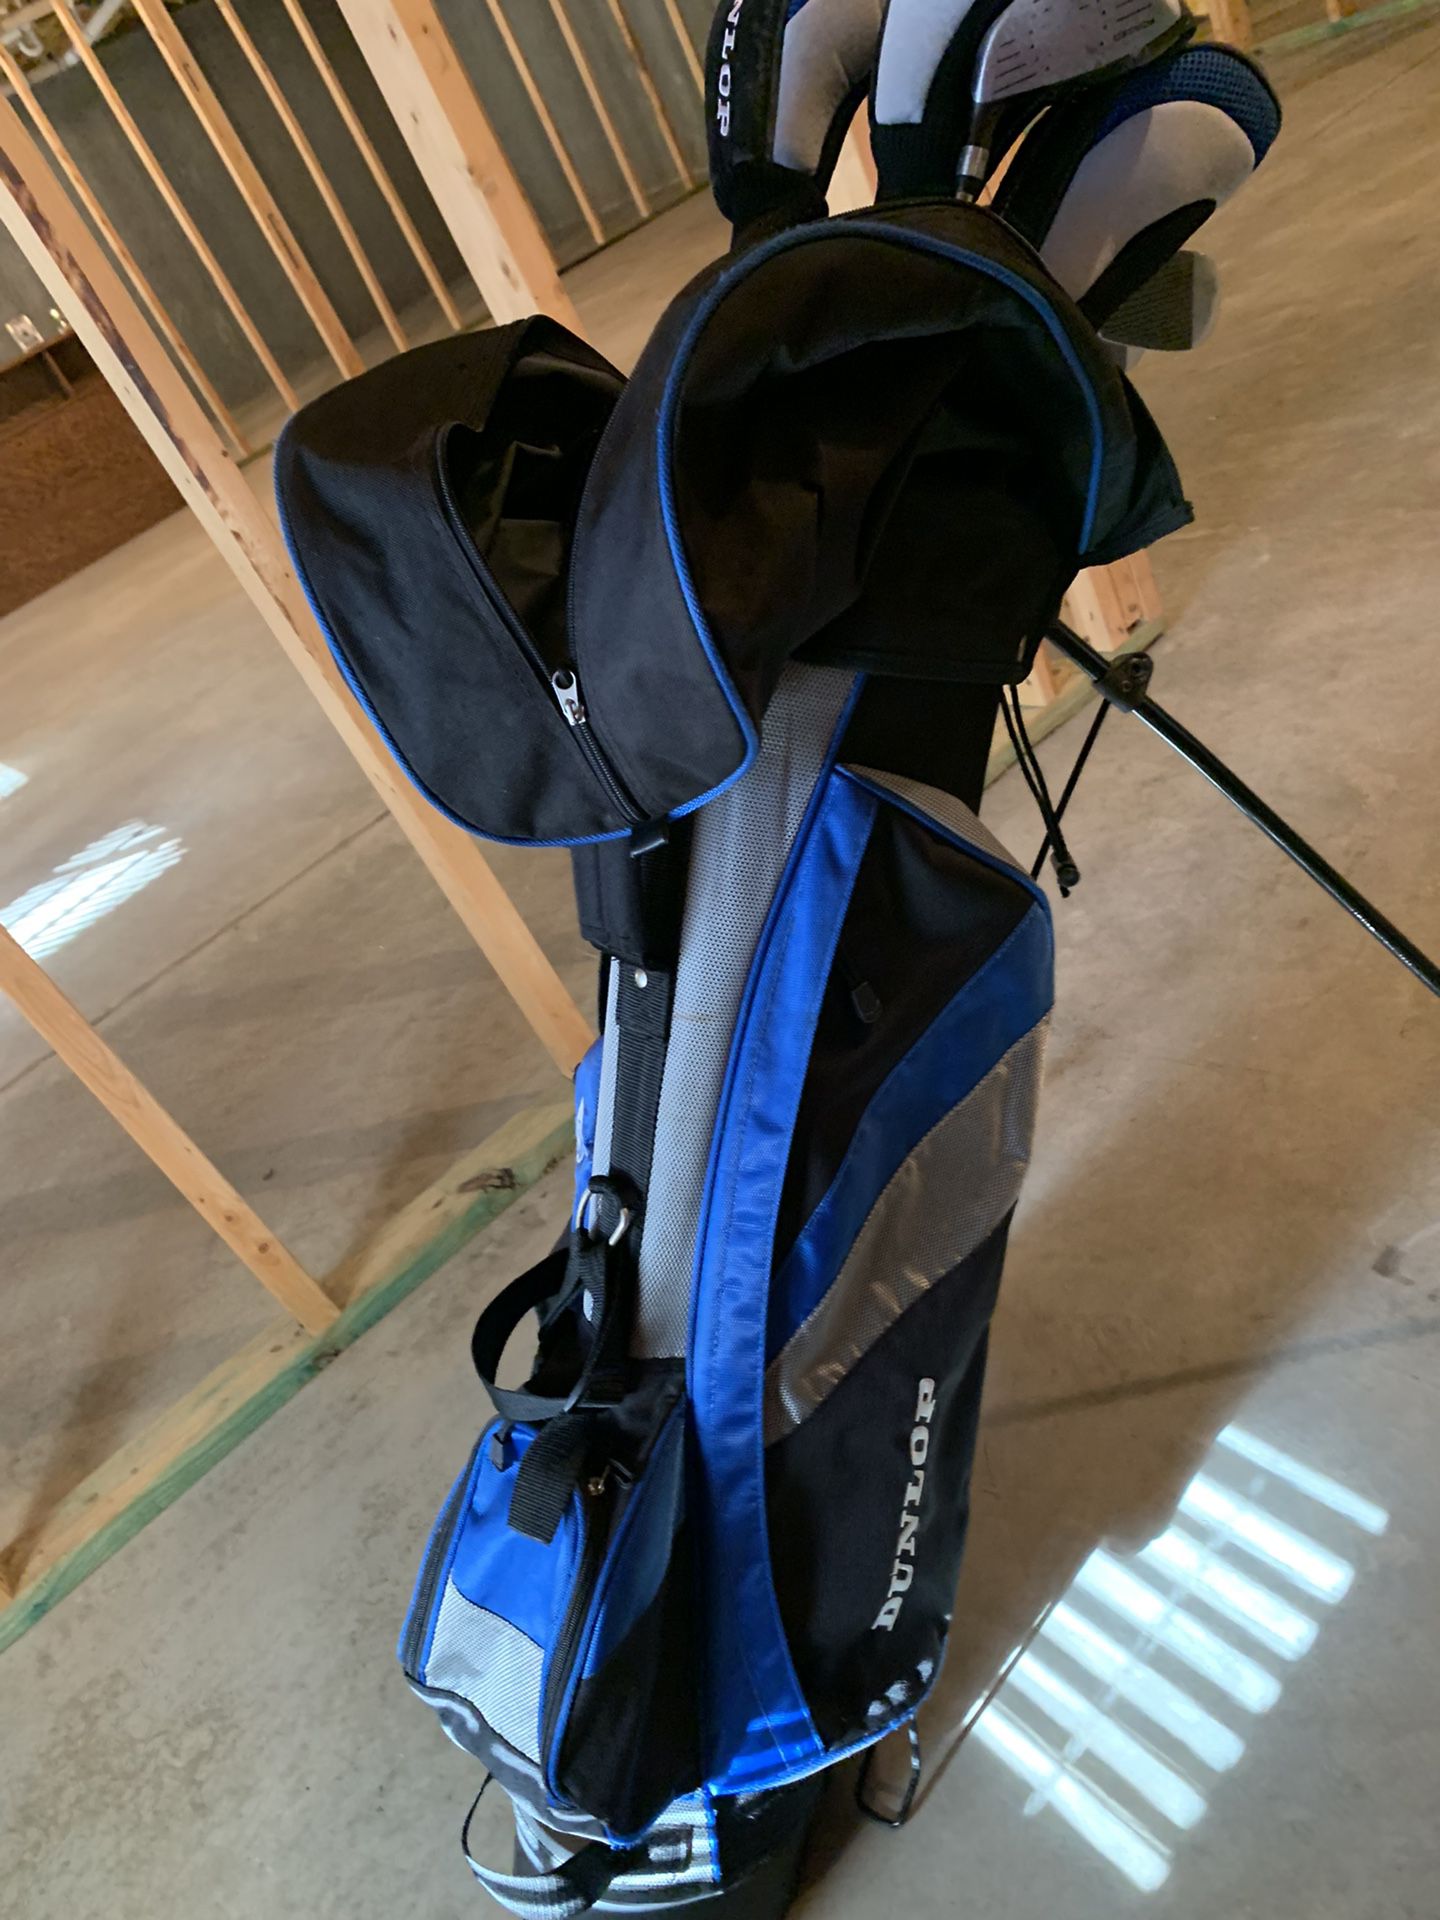 Dunlop Golf Clubs for only $165.00